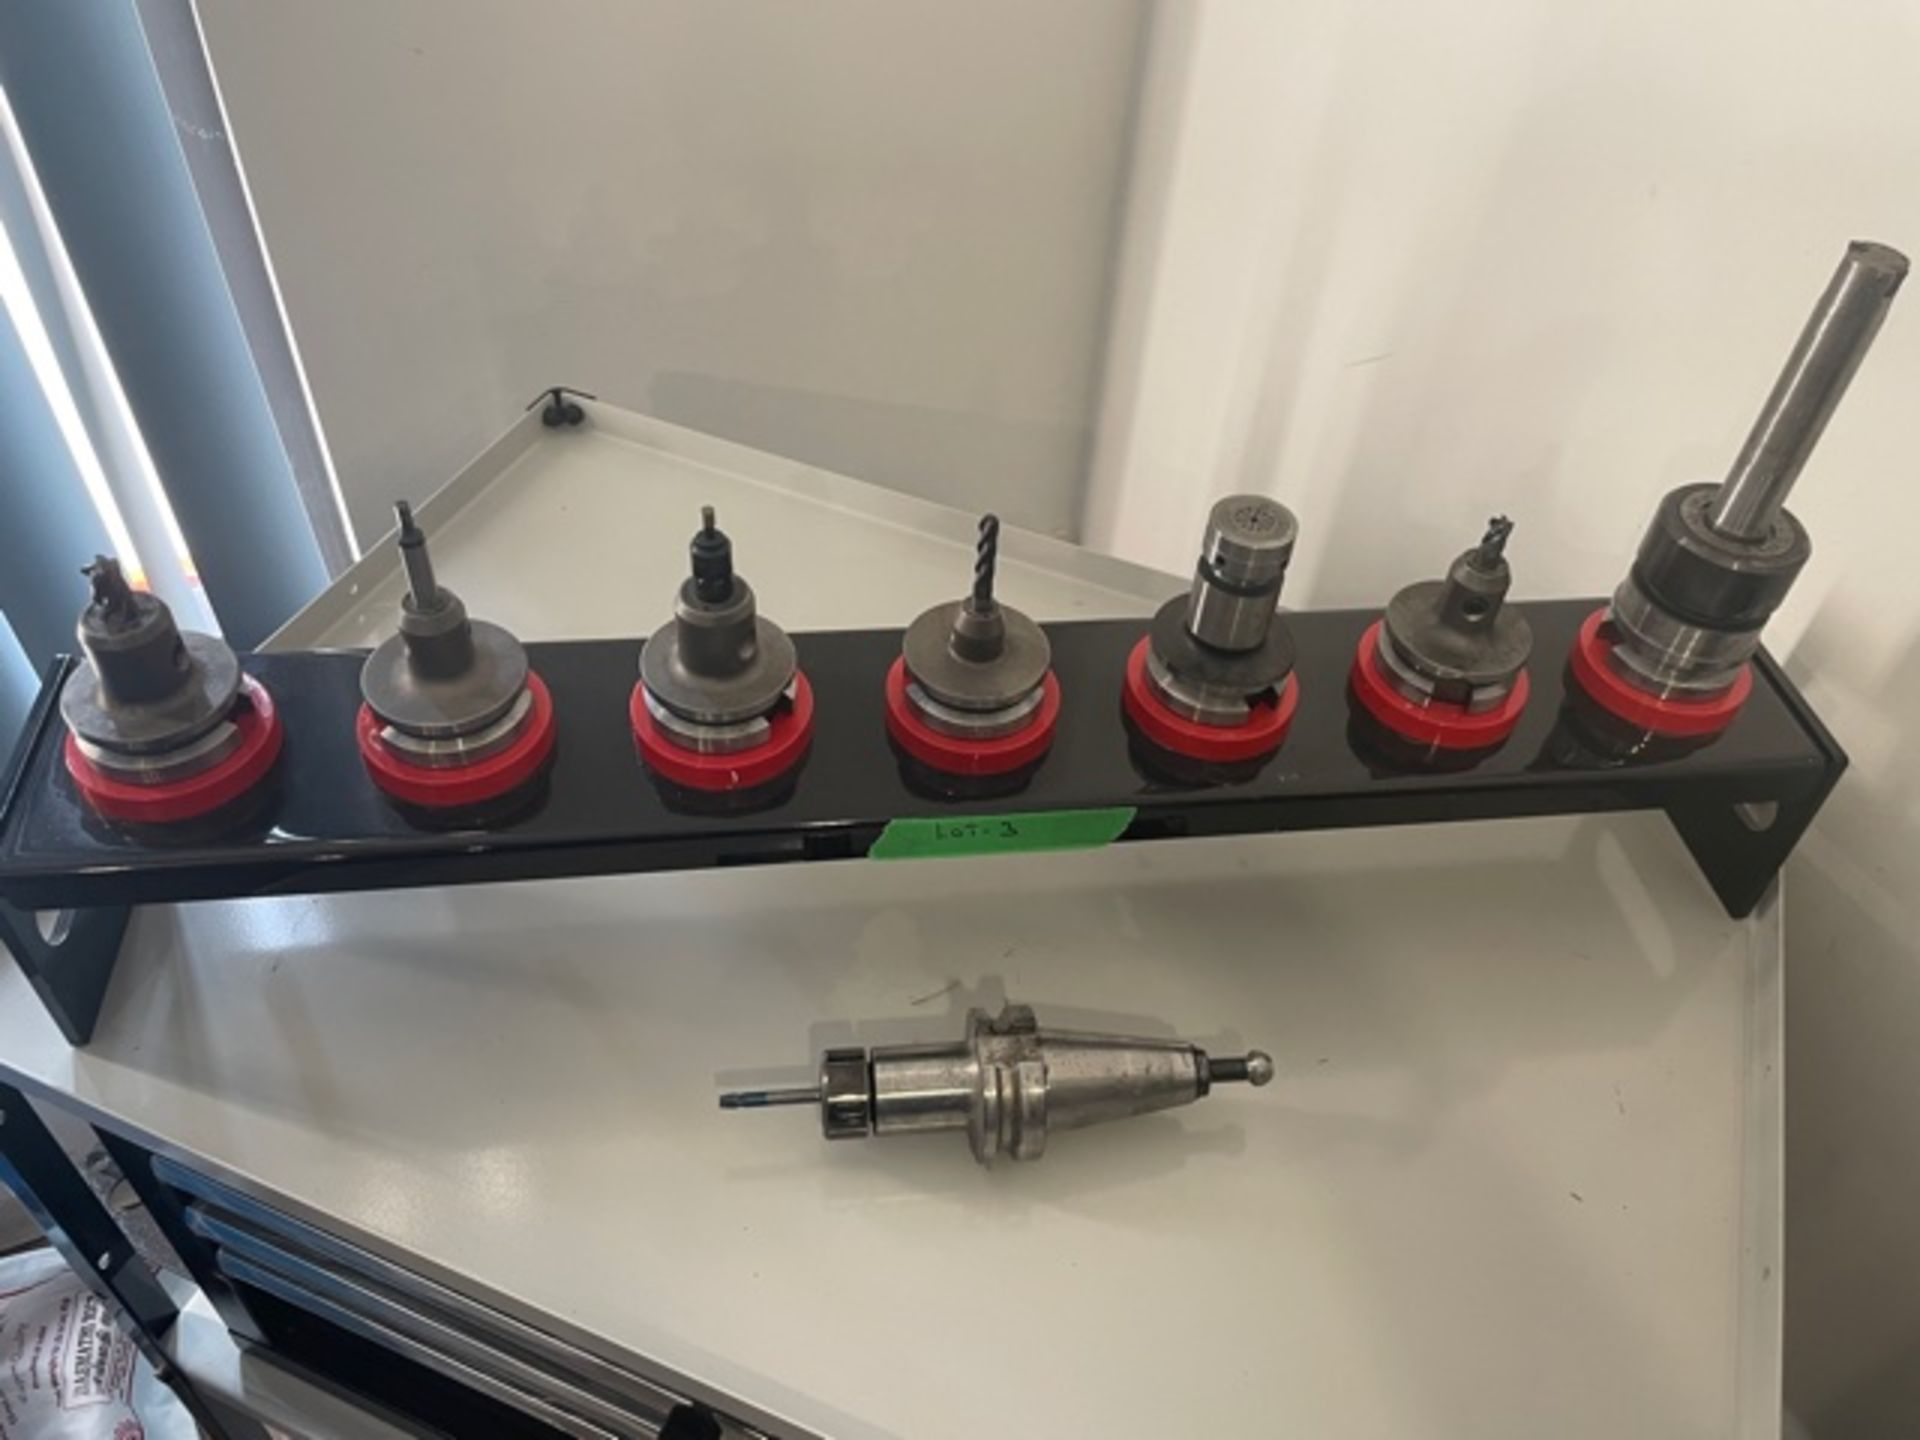 BT 40 – CNC tool Holders with Cutters, 8 Holders with shown cutters and pull studs